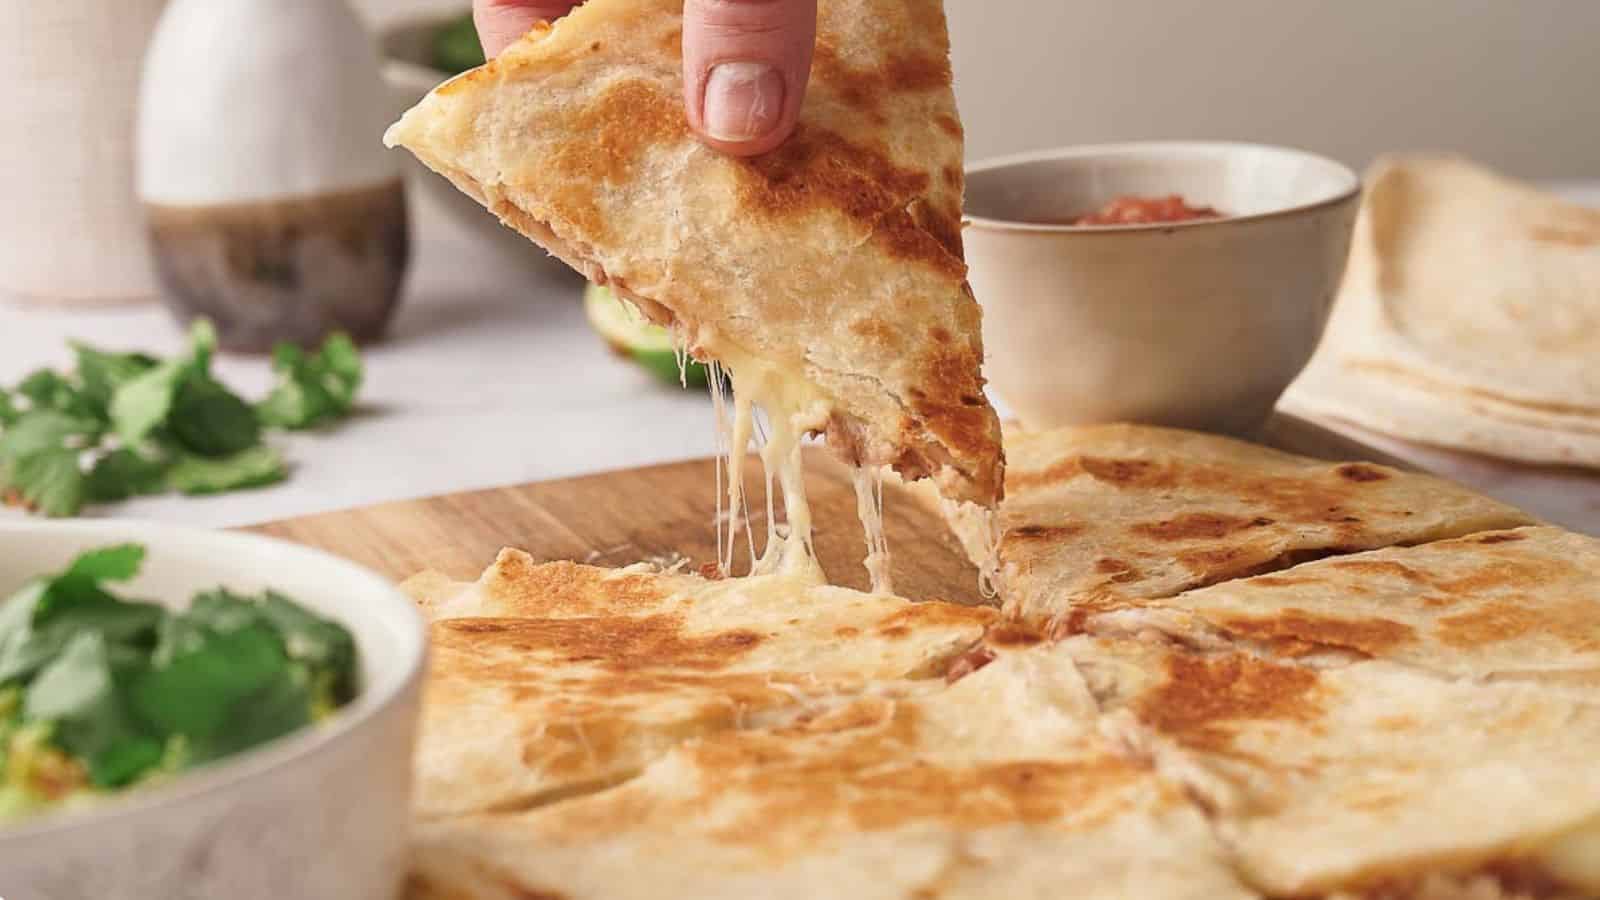 <p>With the air fryer, you can enjoy a perfectly crisp cheese quesadilla without the hassle of stovetop cooking. It’s a simple and efficient method for a tasty meal that requires minimal preparation and delivers maximum flavor.<br><strong>Get the Recipe: </strong><a href="https://www.splashoftaste.com/air-fryer-cheese-quesadilla/?utm_source=msn&utm_medium=page&utm_campaign=msn">Air Fryer Cheese Quesadilla</a></p>